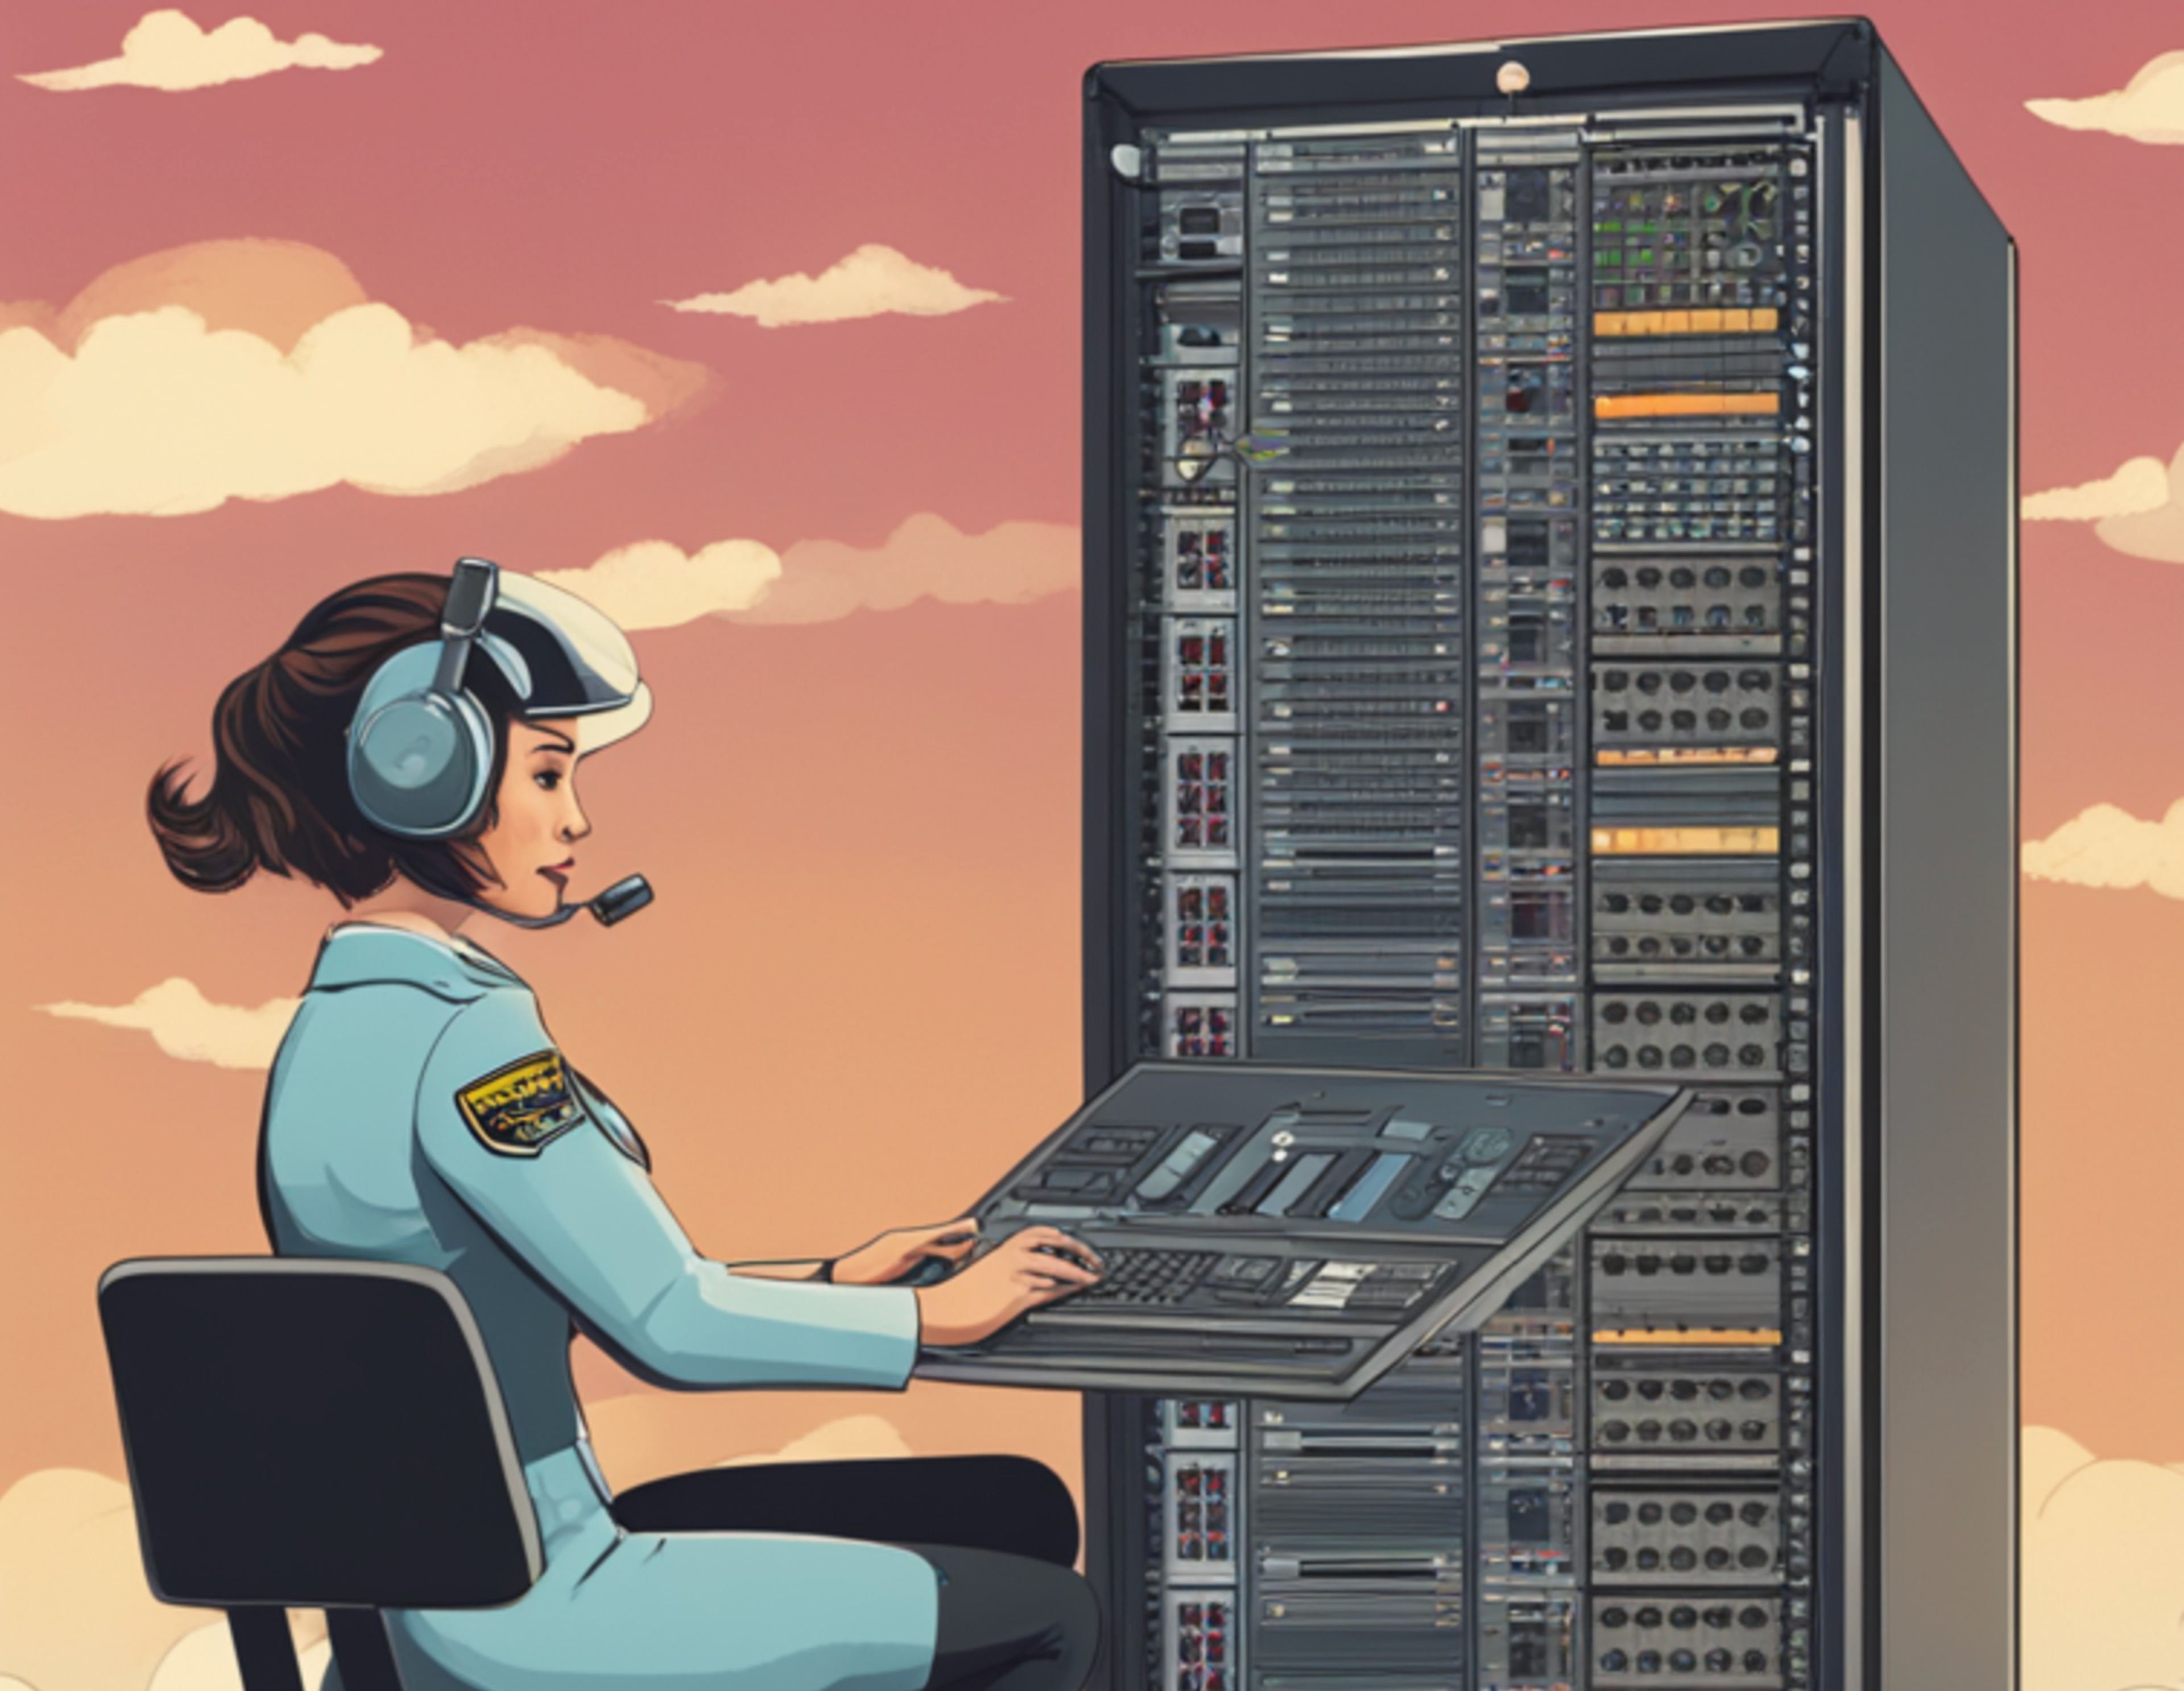 Generated image of a woman in a pilot uniform sitting at a server rack